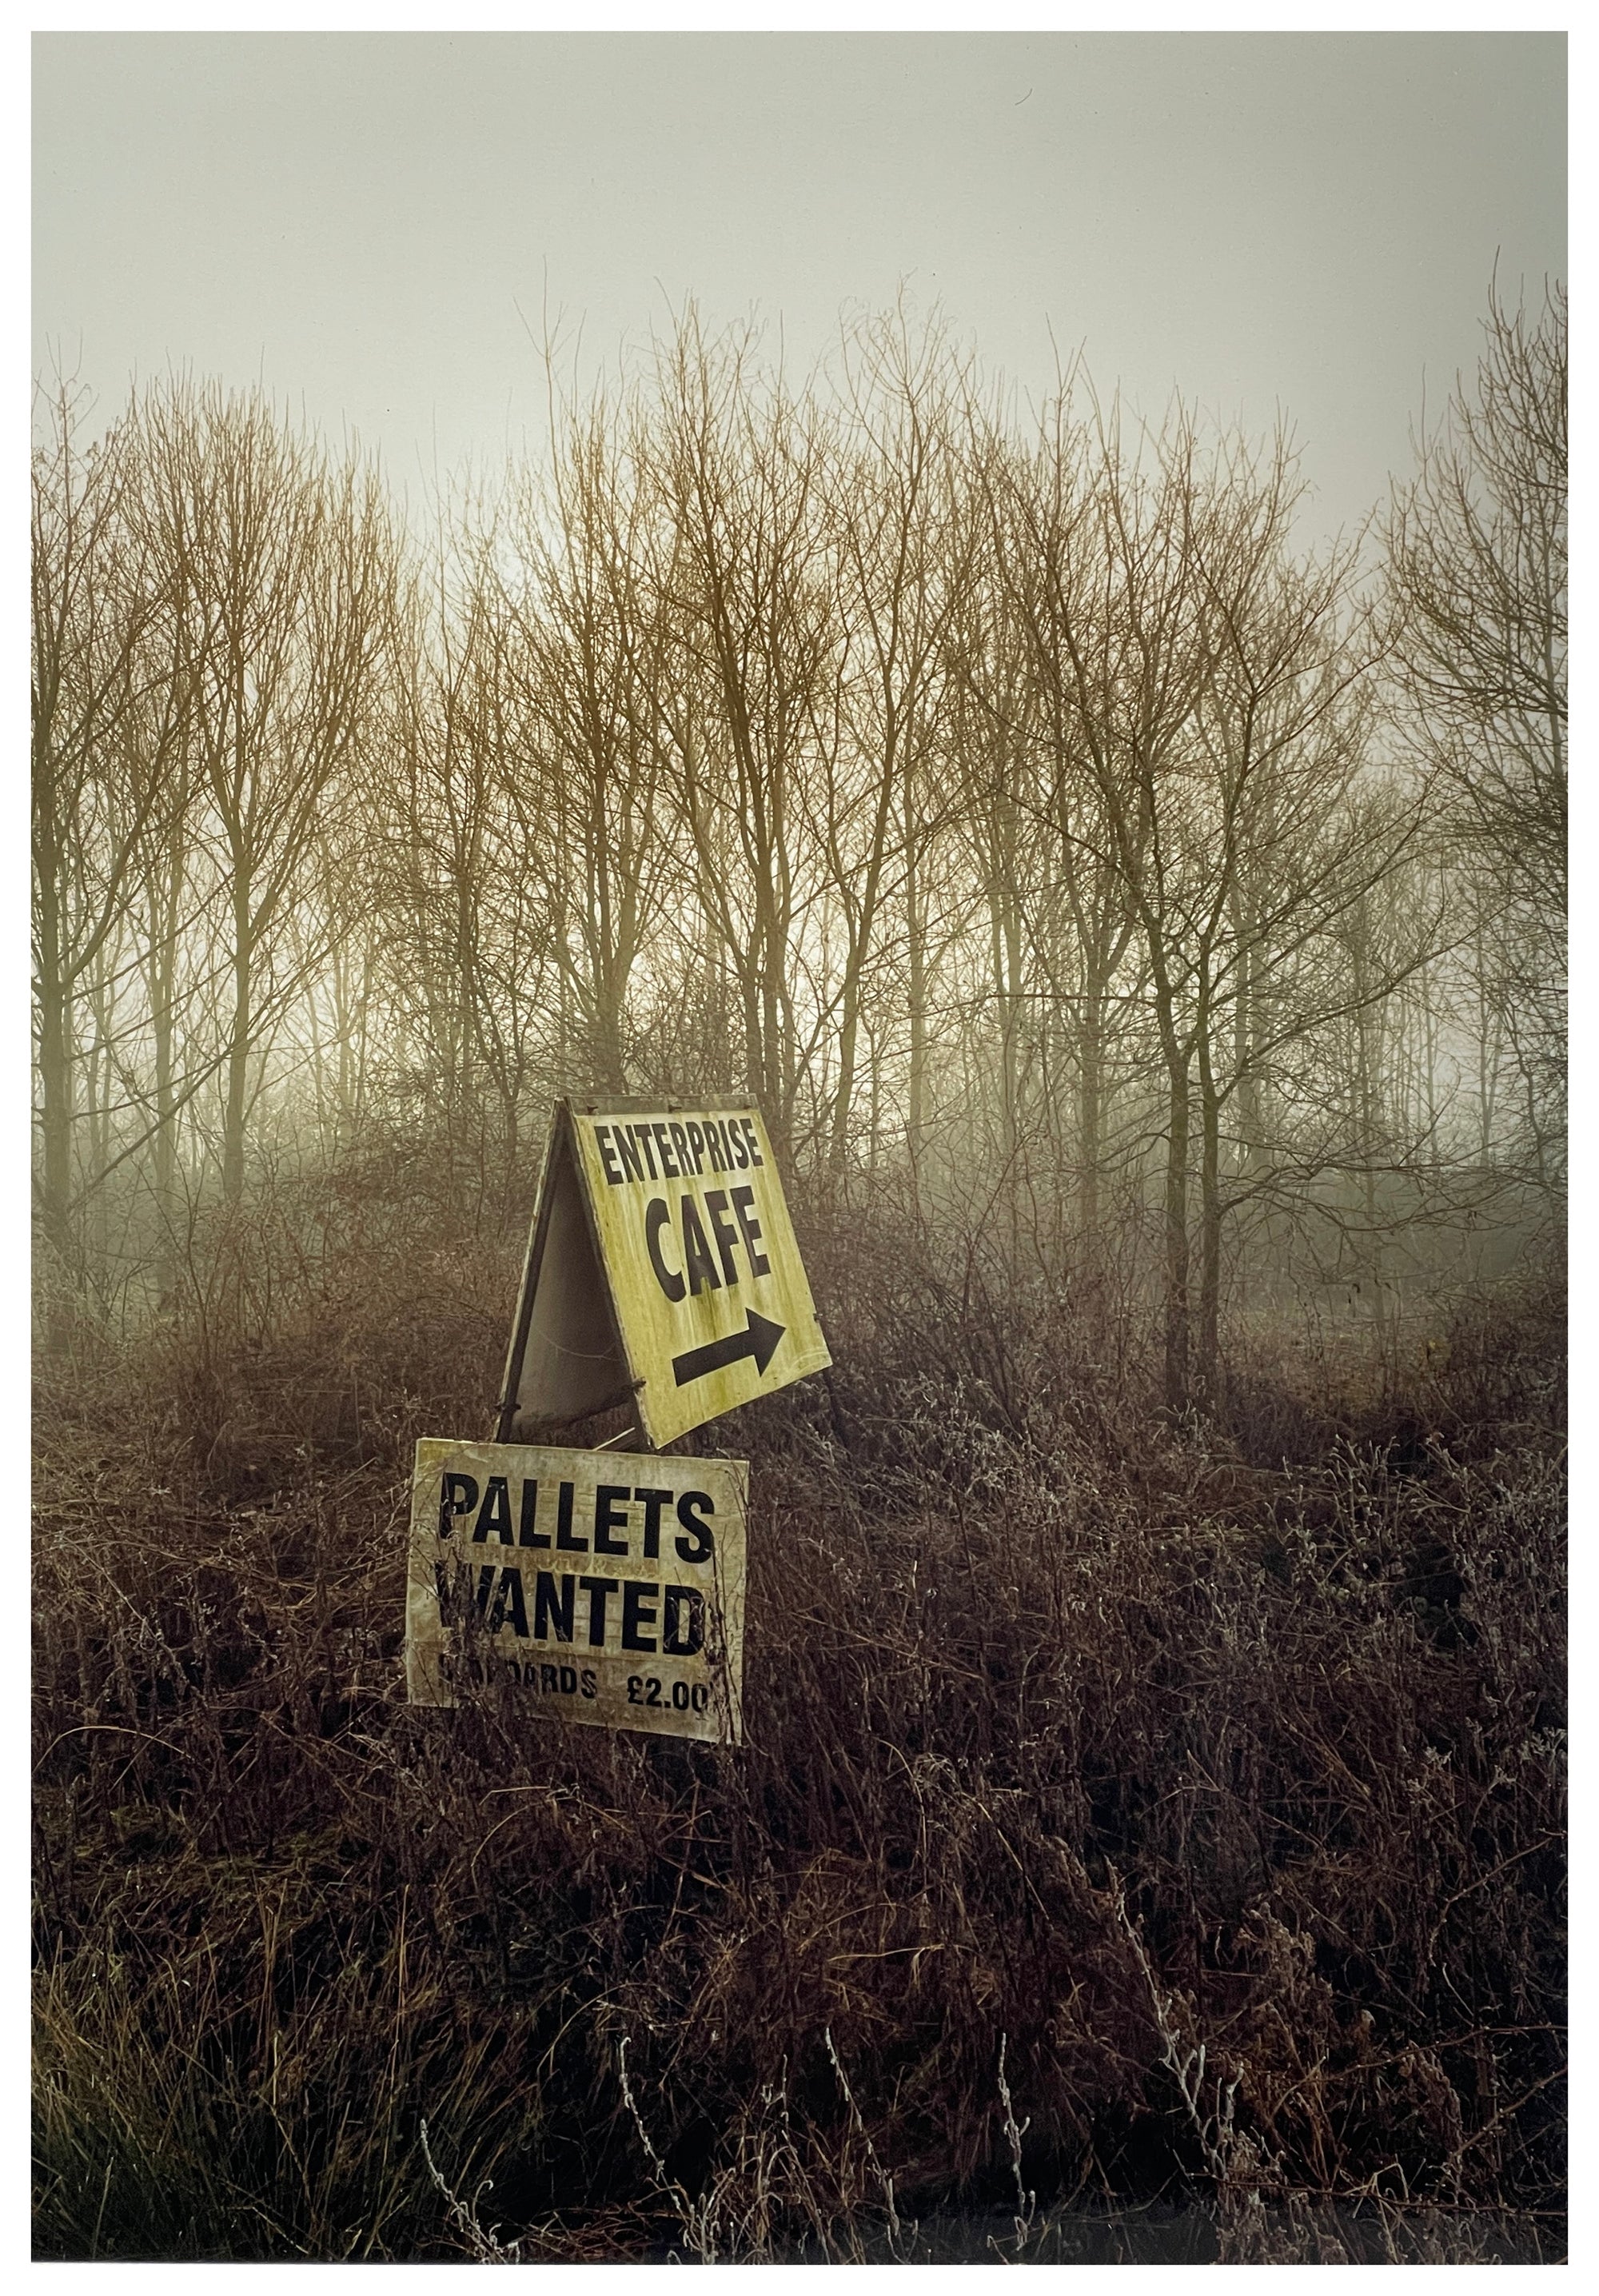 Photograph by Richard Heeps.  A roadside sign for The Enterprise Cafe and Pallets Wanted sit in brown shrub with wintry trees and sky in the background.